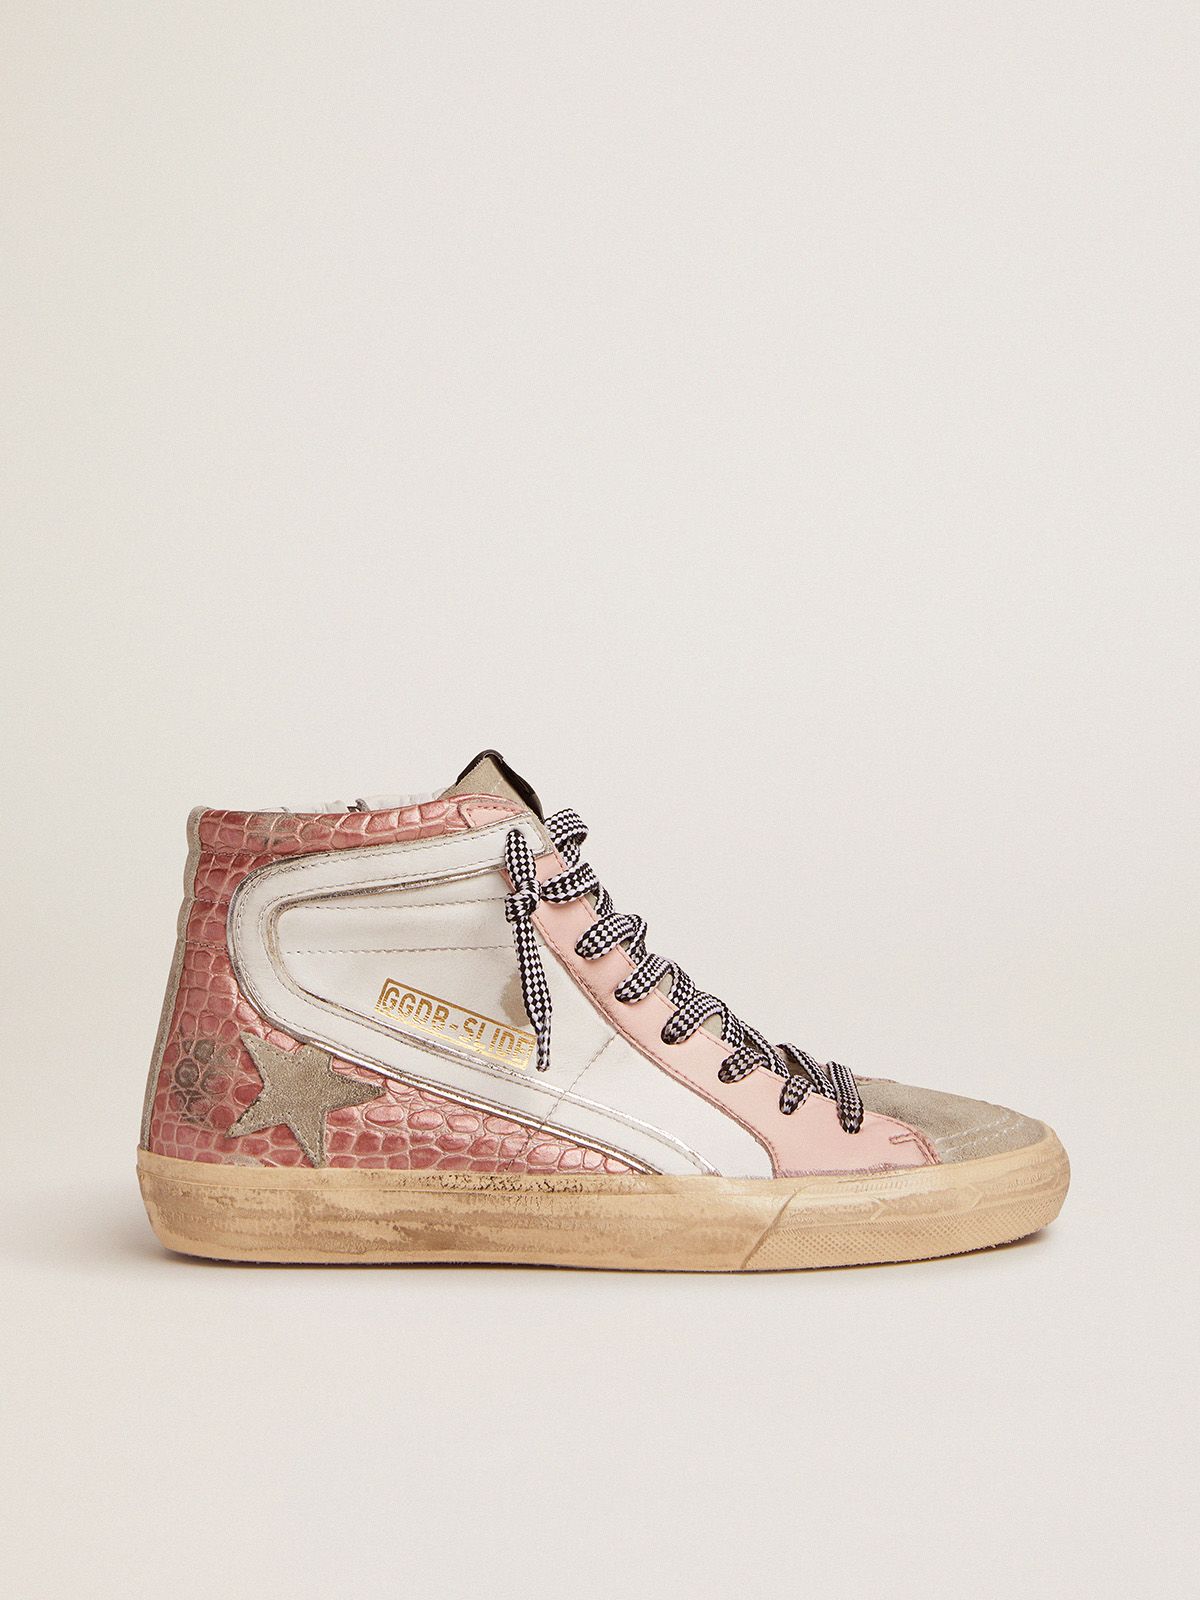 golden goose and leather pink crocodile-print white sneakers Slide with upper